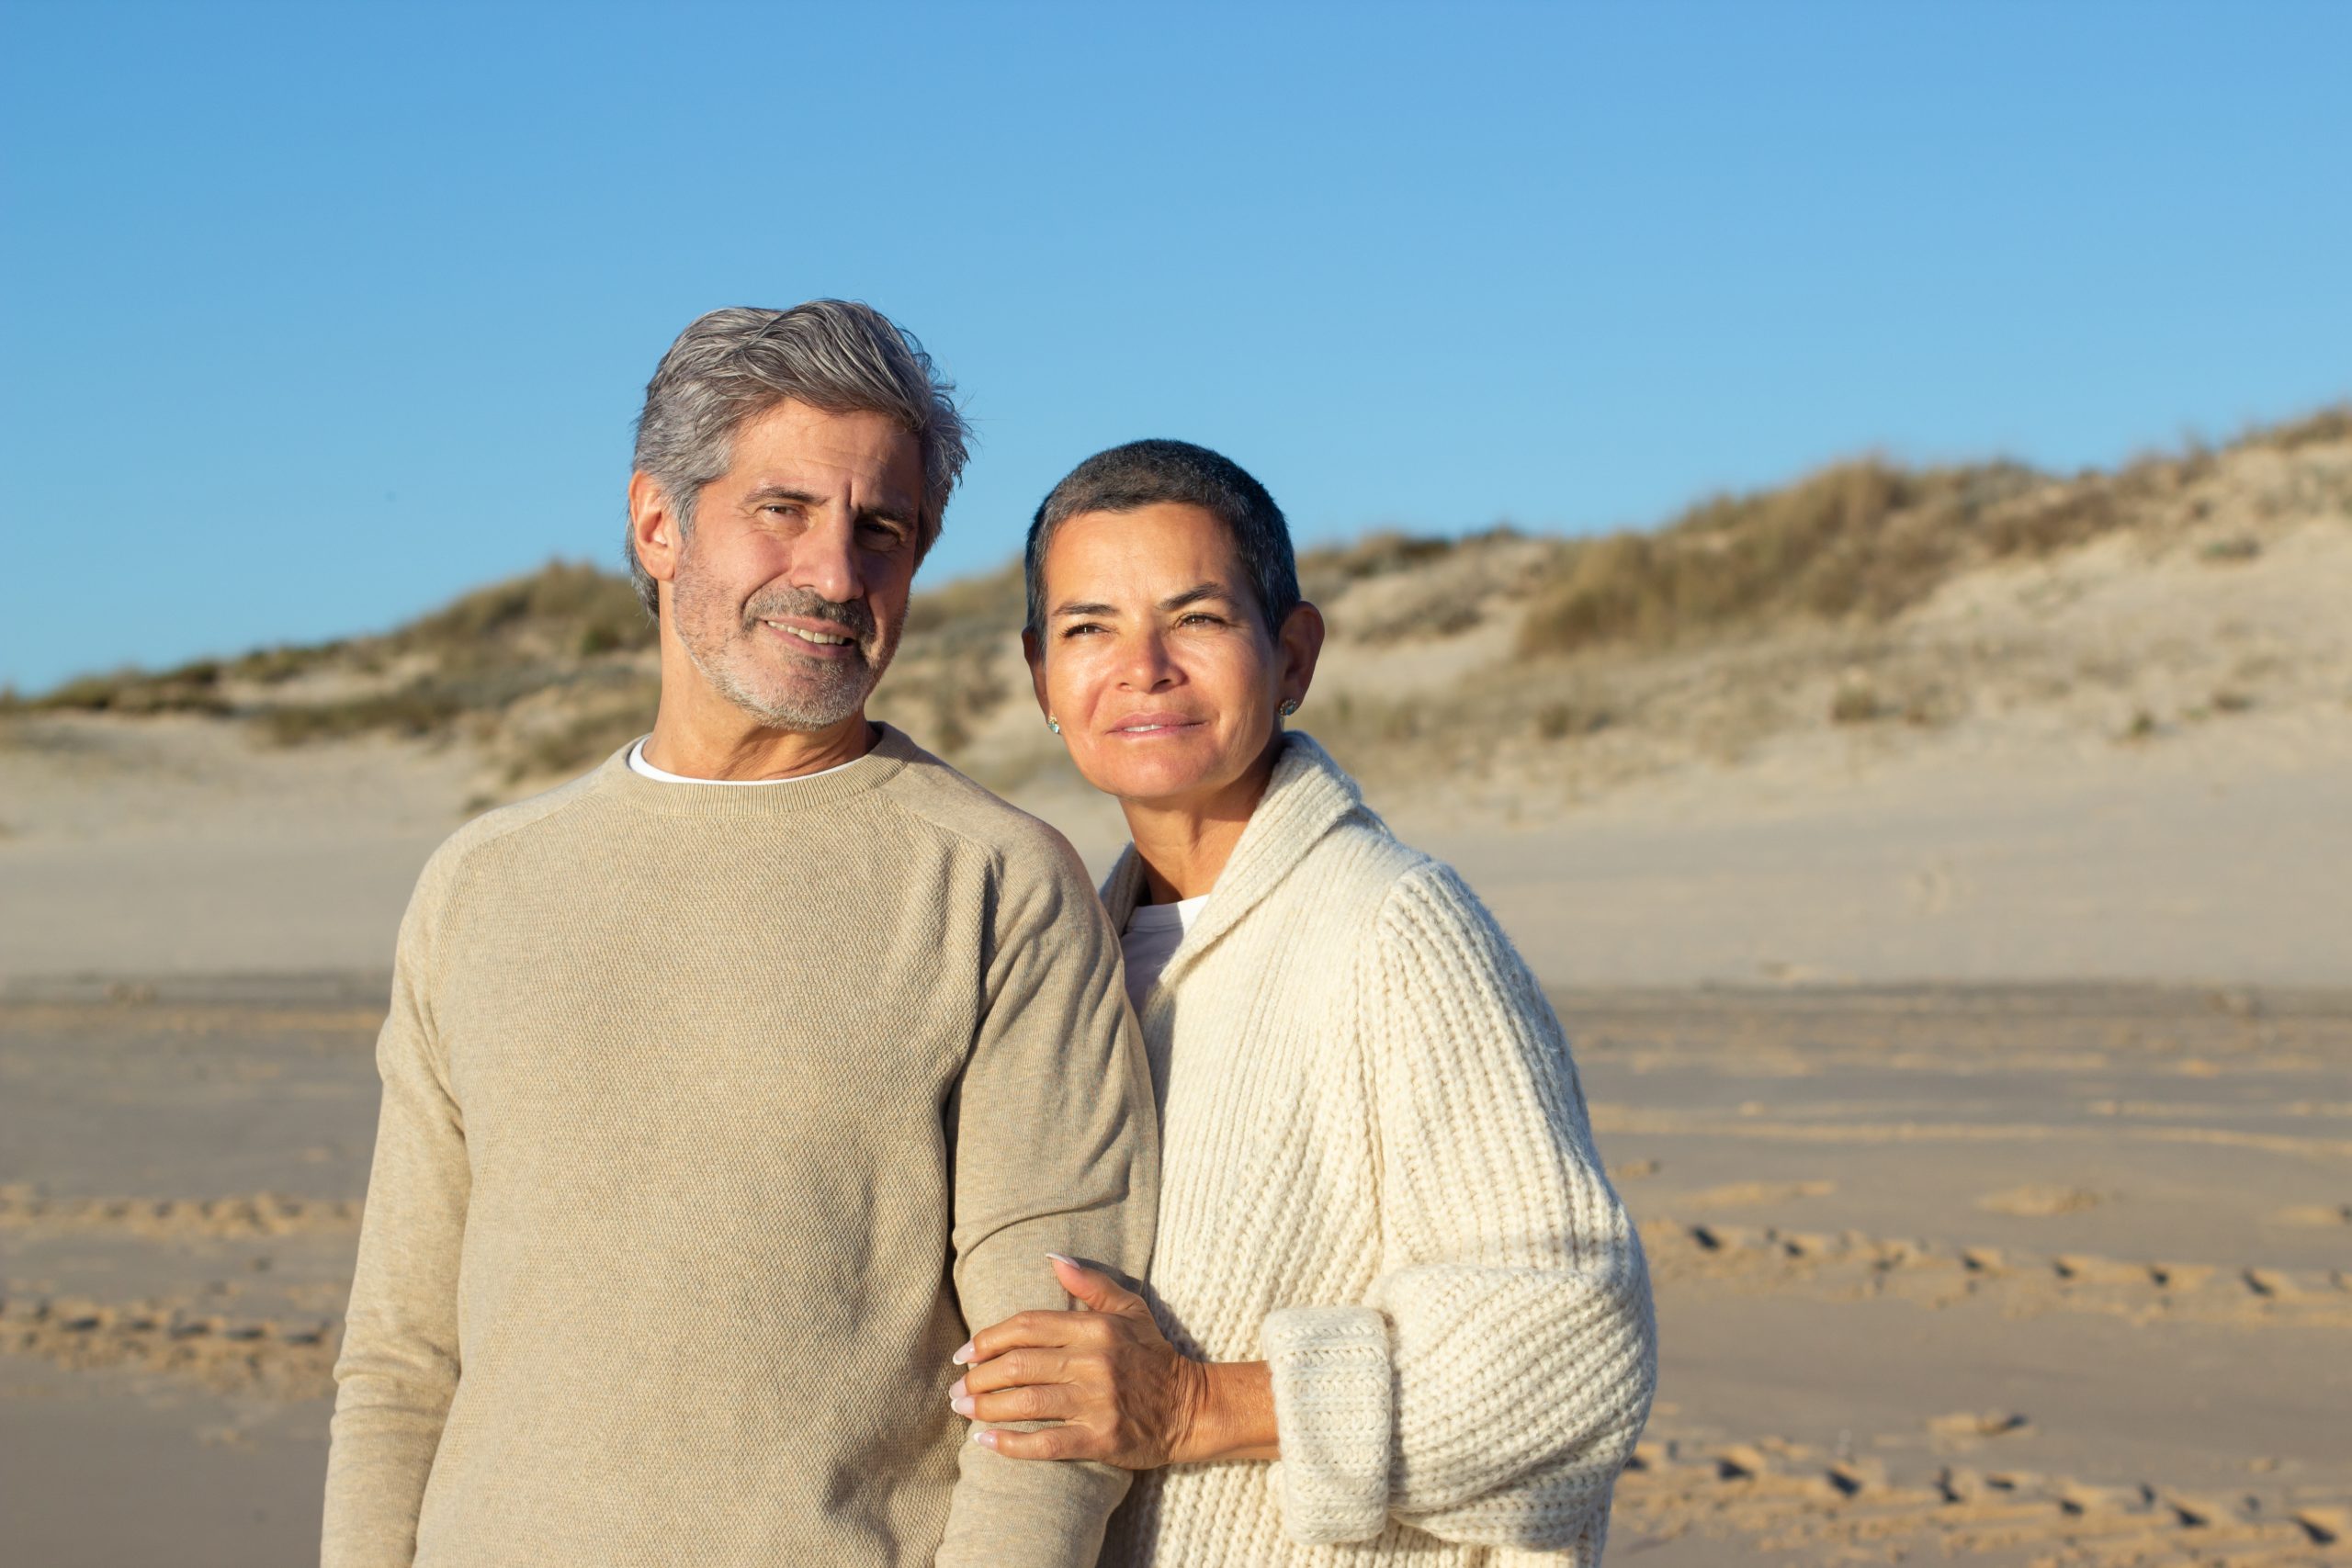 Senior couple spending time outside at seashore together